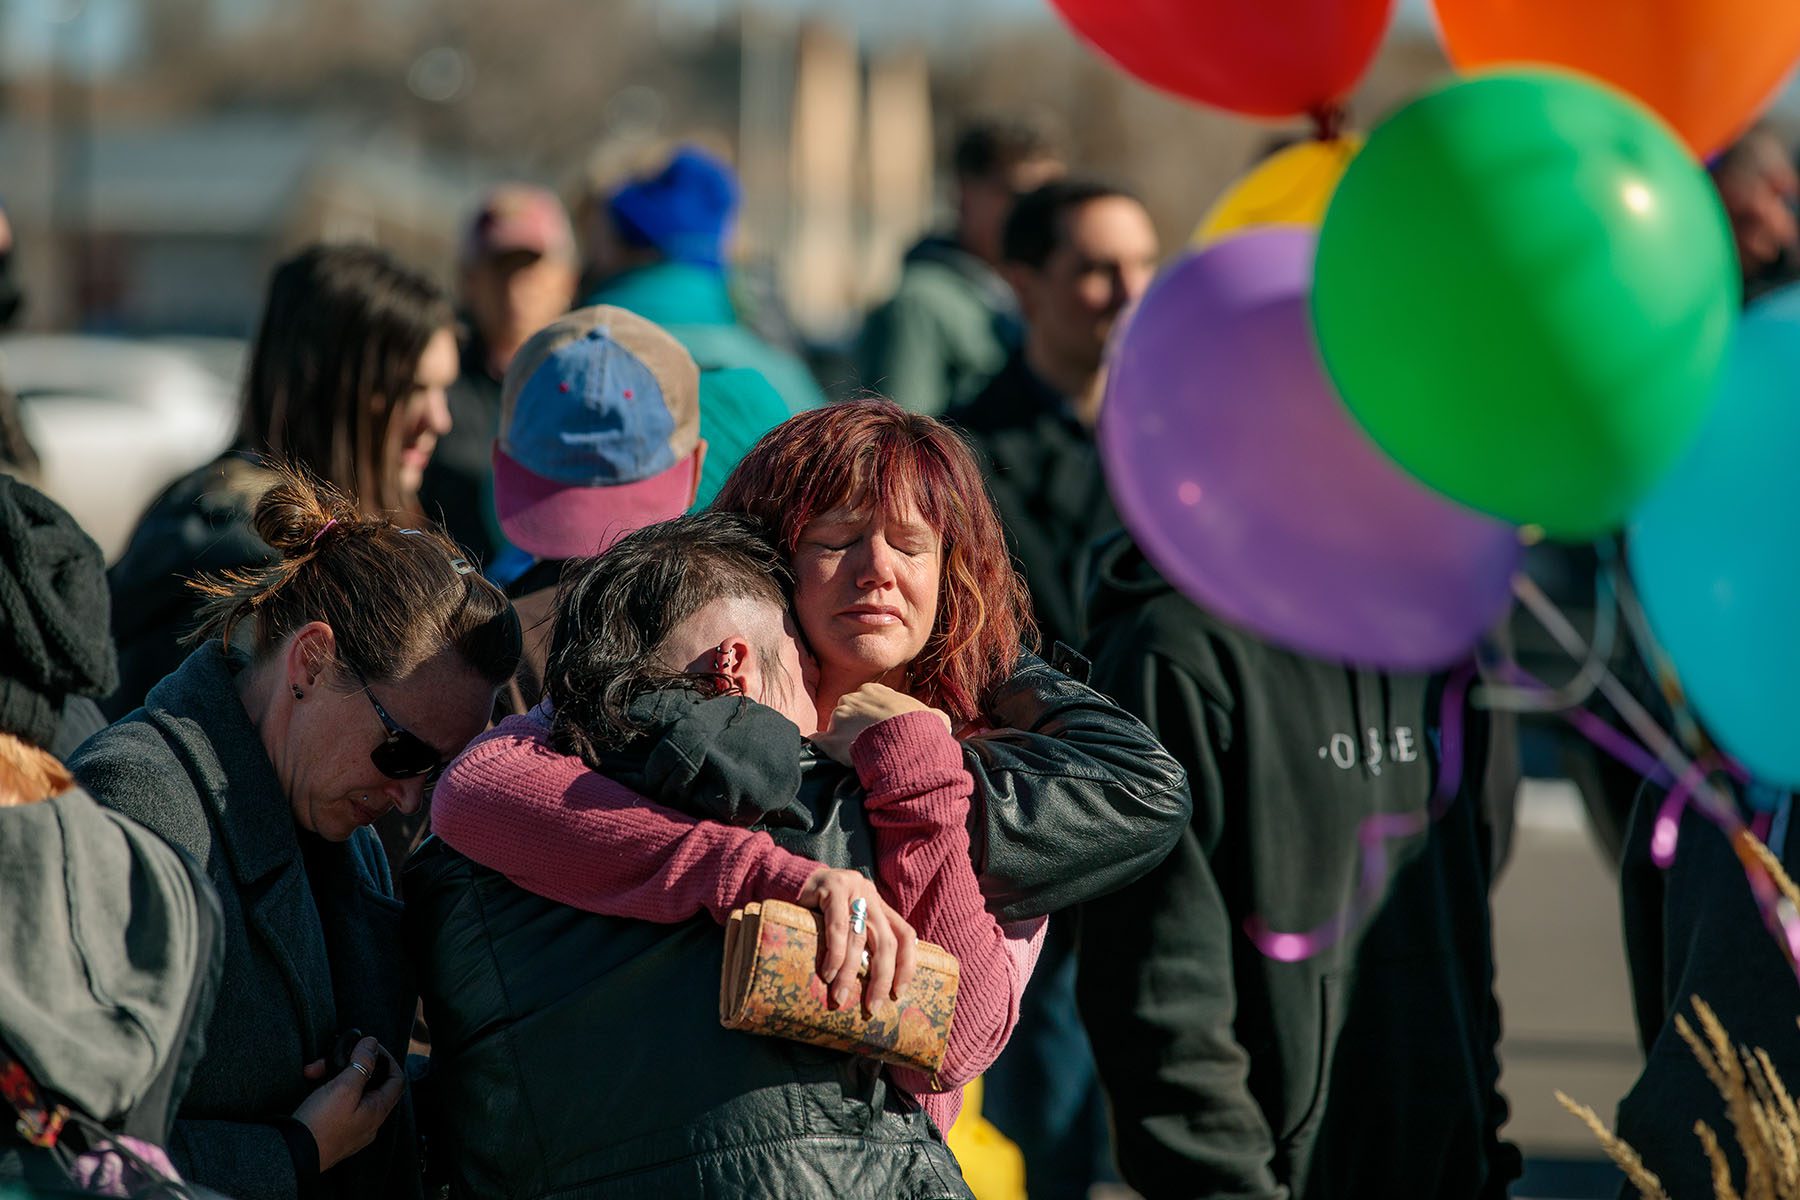 Tearful people embrace outside a vigil at All Souls Unitarian Church. Rainbow colored balloons can be seen in the foreground.